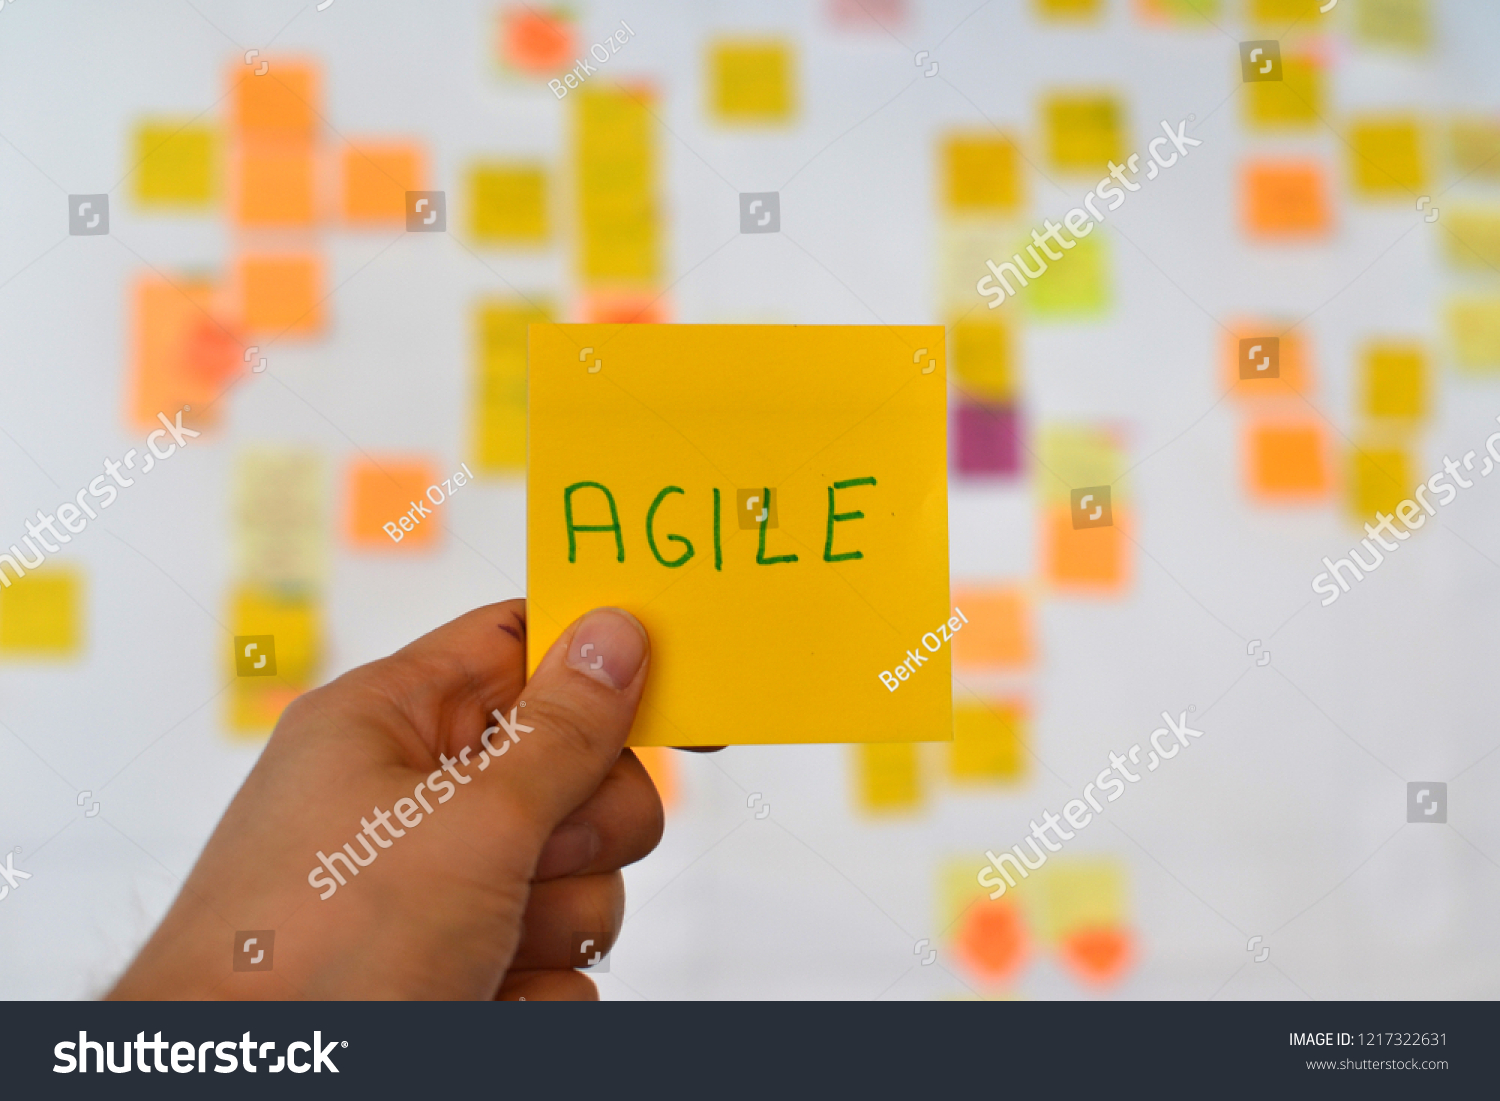 A hand is holding a orange agile sticker and there is a Kanban board of agile methodology on the background, which is a developing trend in Information Technology (IT) business.
 #1217322631